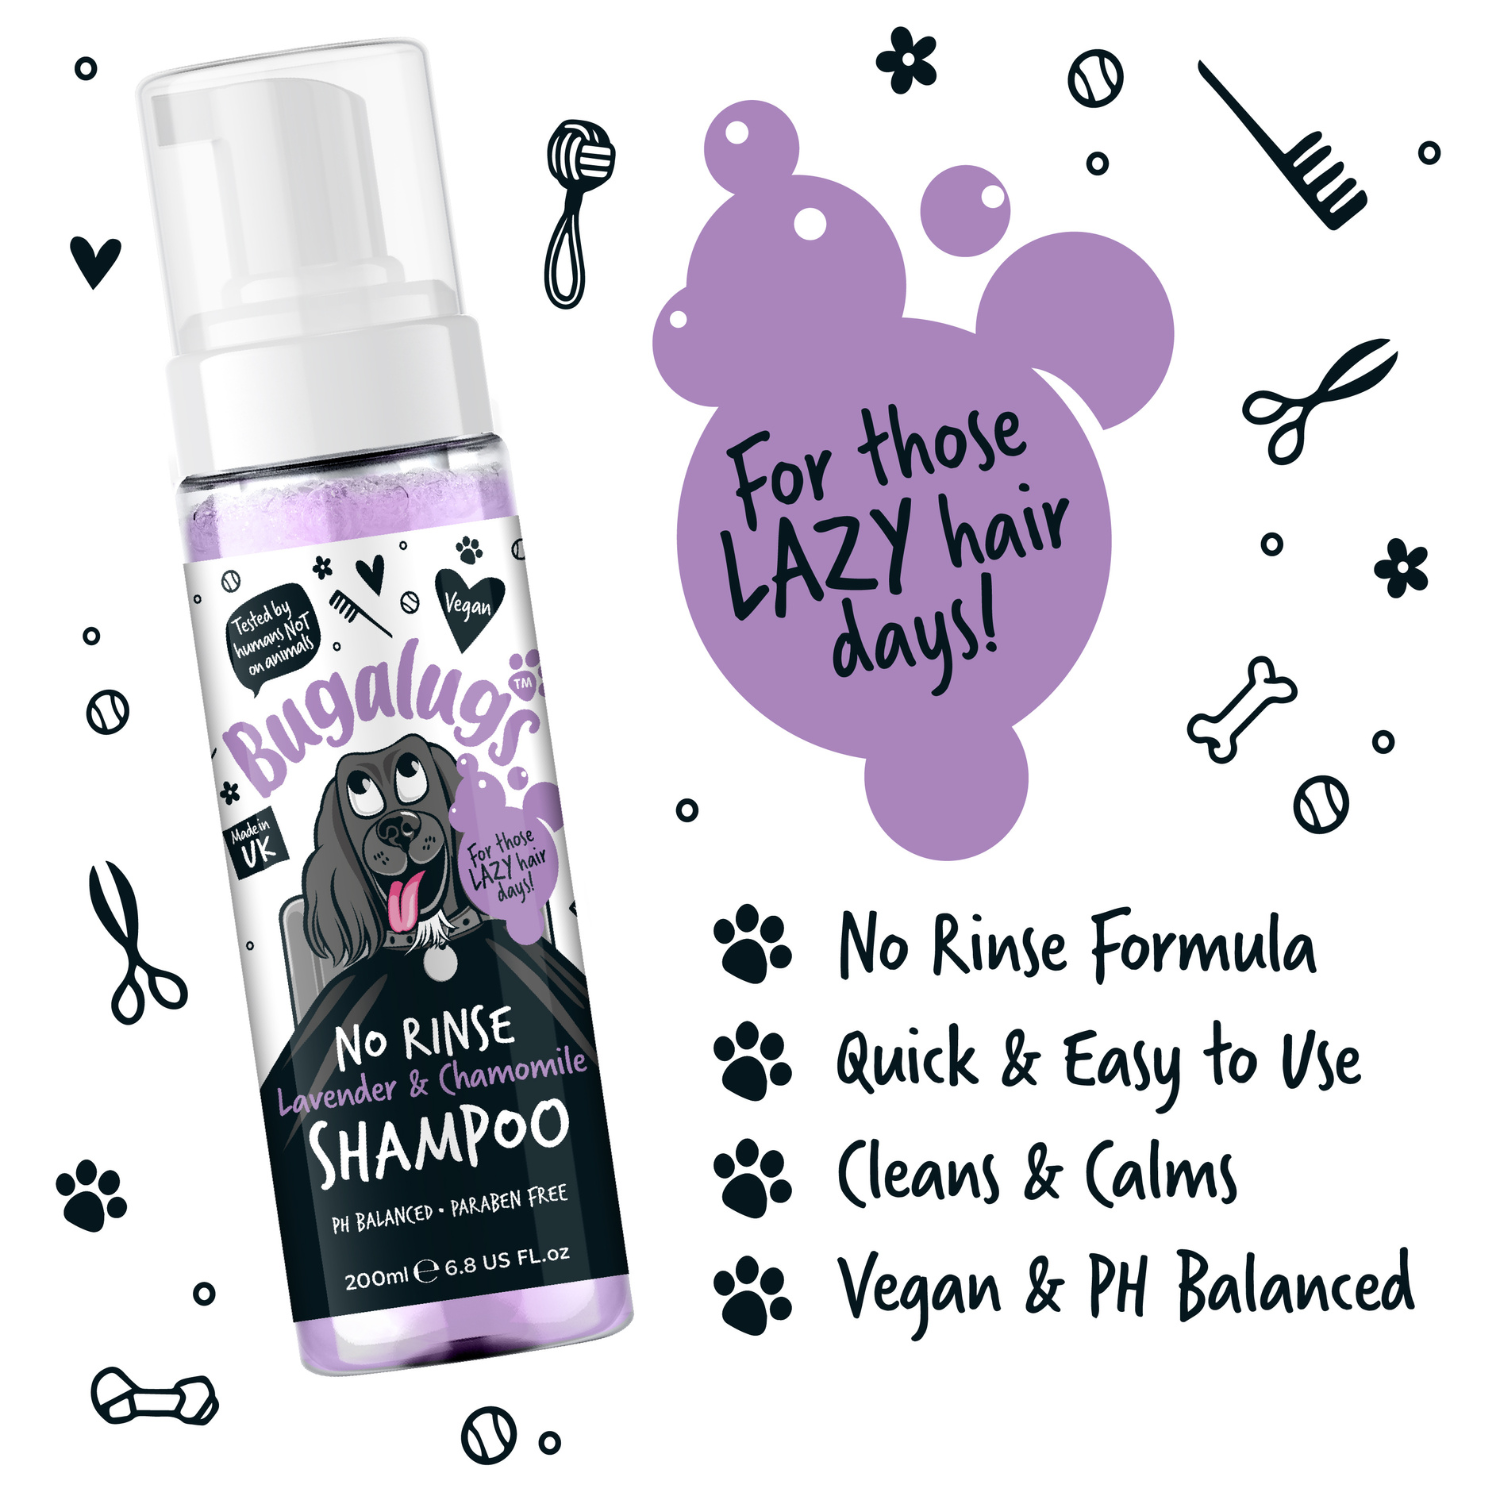 Bugalugs No Rinse Lavender and Chamomile Shampoo for Dogs - For those lazy hair days